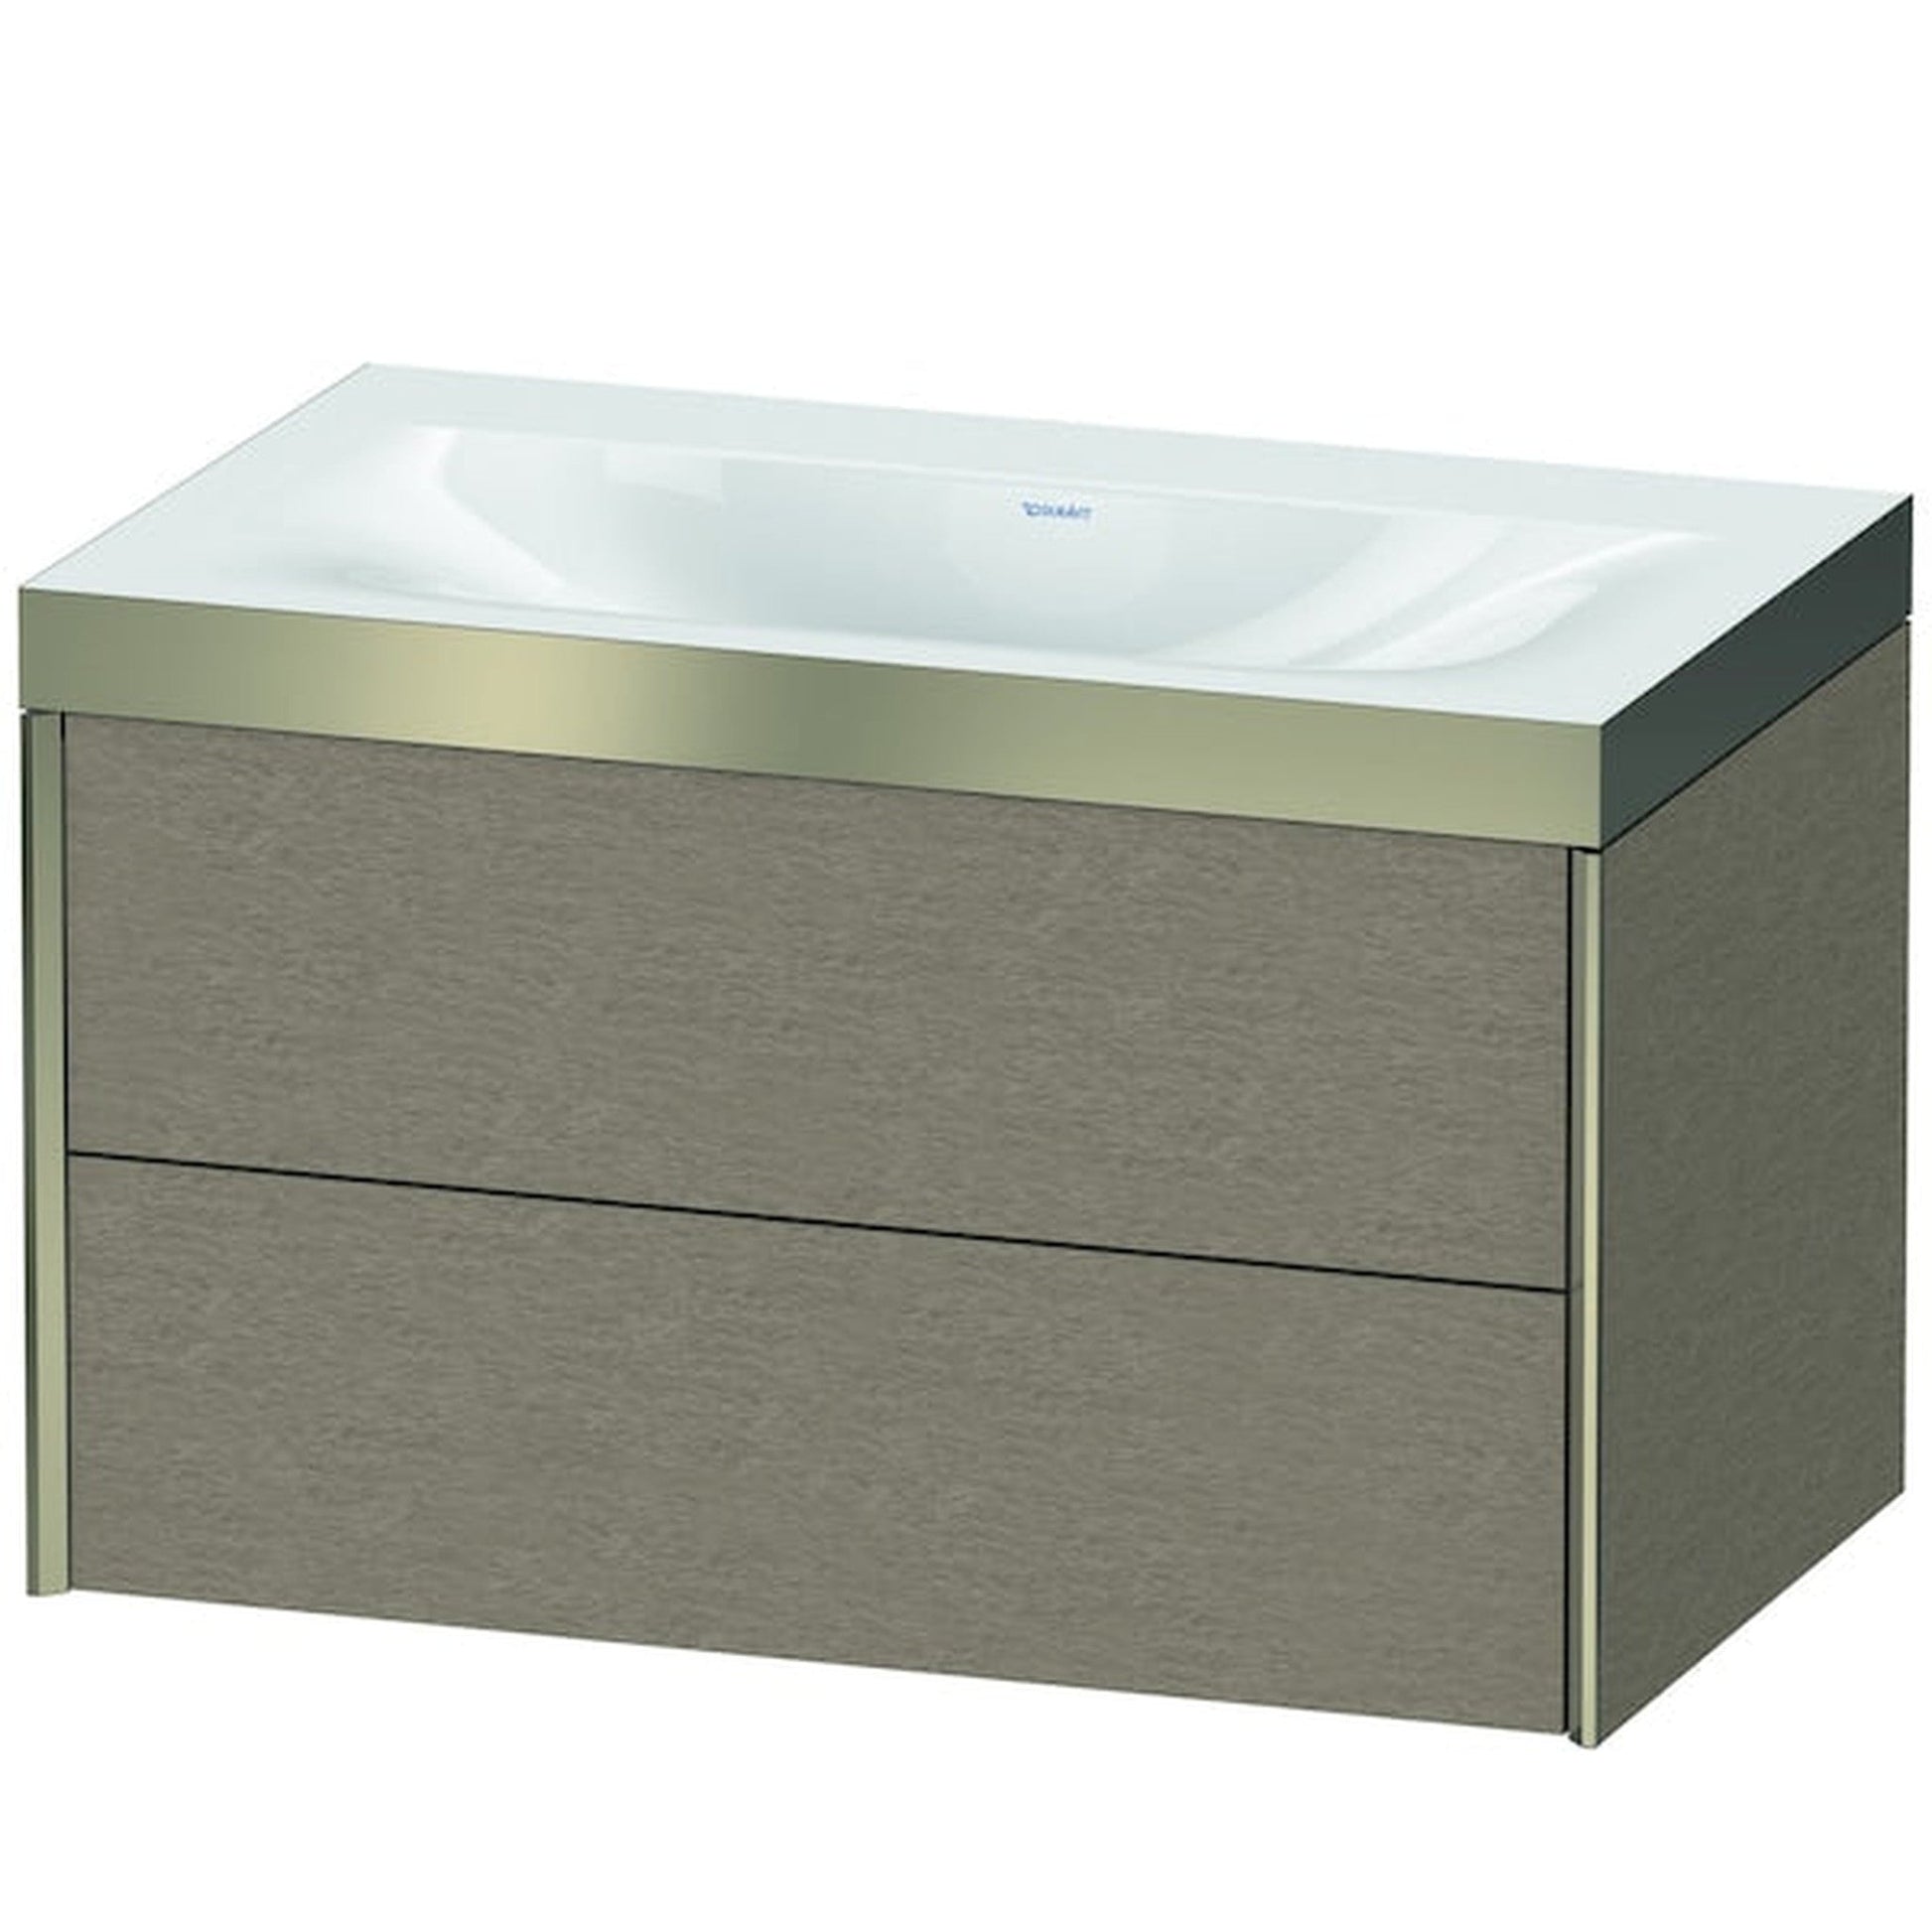 Duravit Xviu 31" x 20" x 19" Two Drawer C-Bonded Wall-Mount Vanity Kit Without Tap Hole, Cashmere Oak (XV4615NB111P)